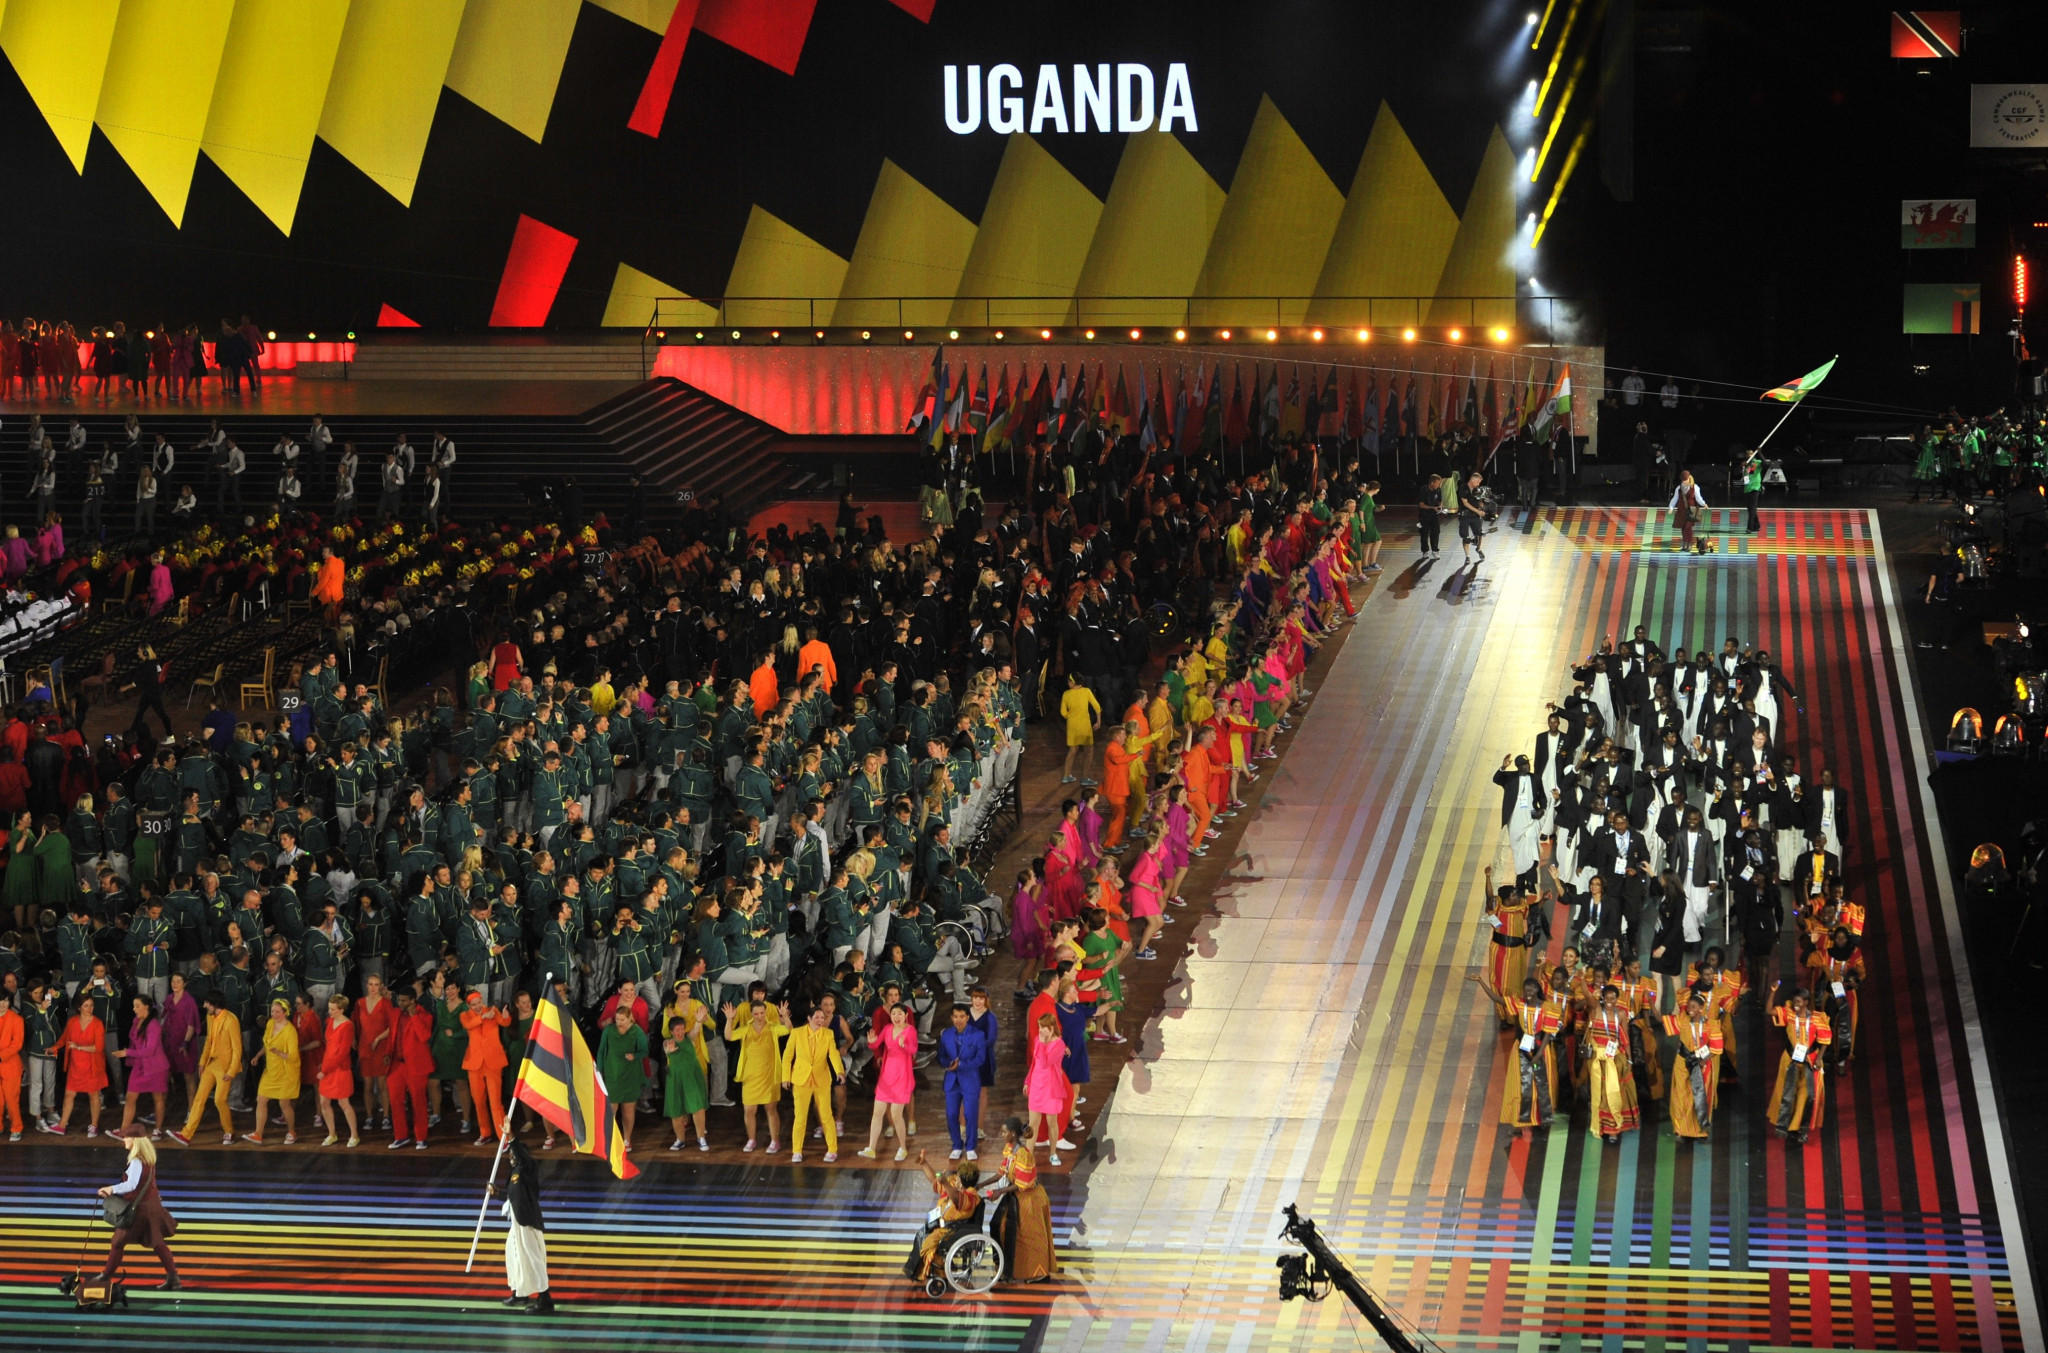 Ugandan athletes pictured marching at the Opening Ceremony of the Glasgow 2014 Commonwealth Games ©Getty Images